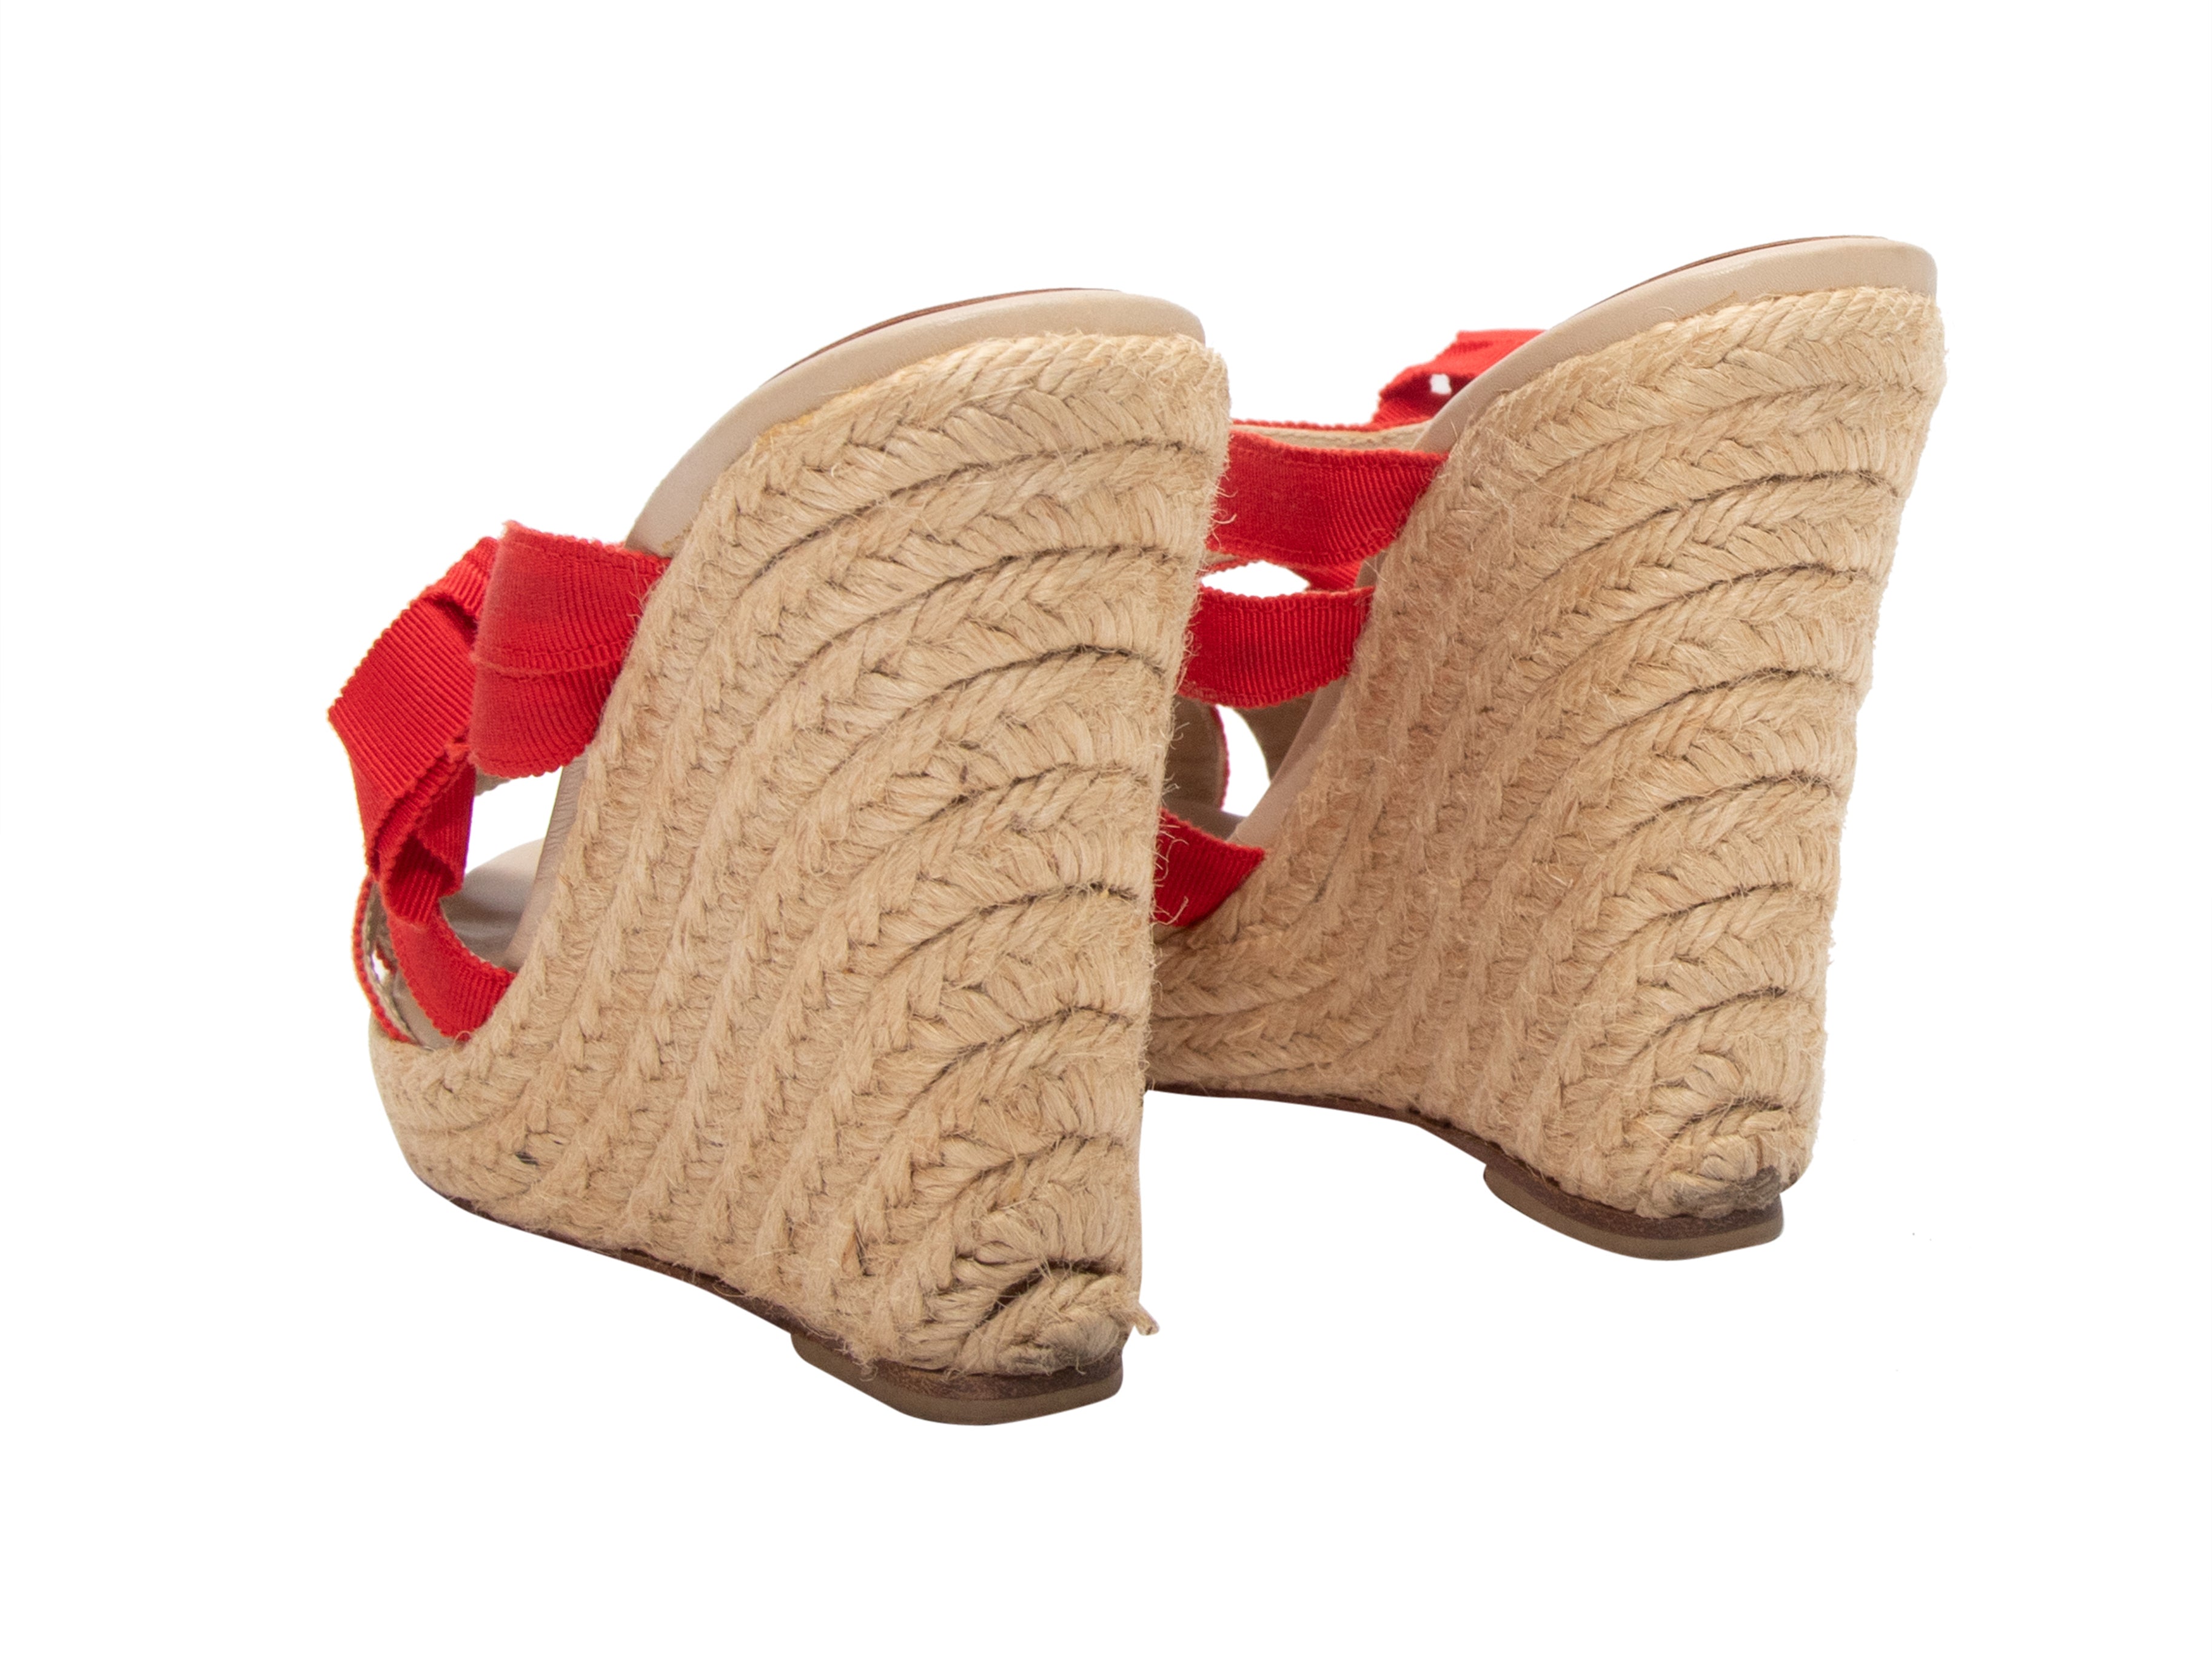 CHRISTIAN LOUBOUTIN Red Ibiza Espadrille Wedges (Size USA 9 / Euro 39)  #23073 – ALL YOUR BLISS